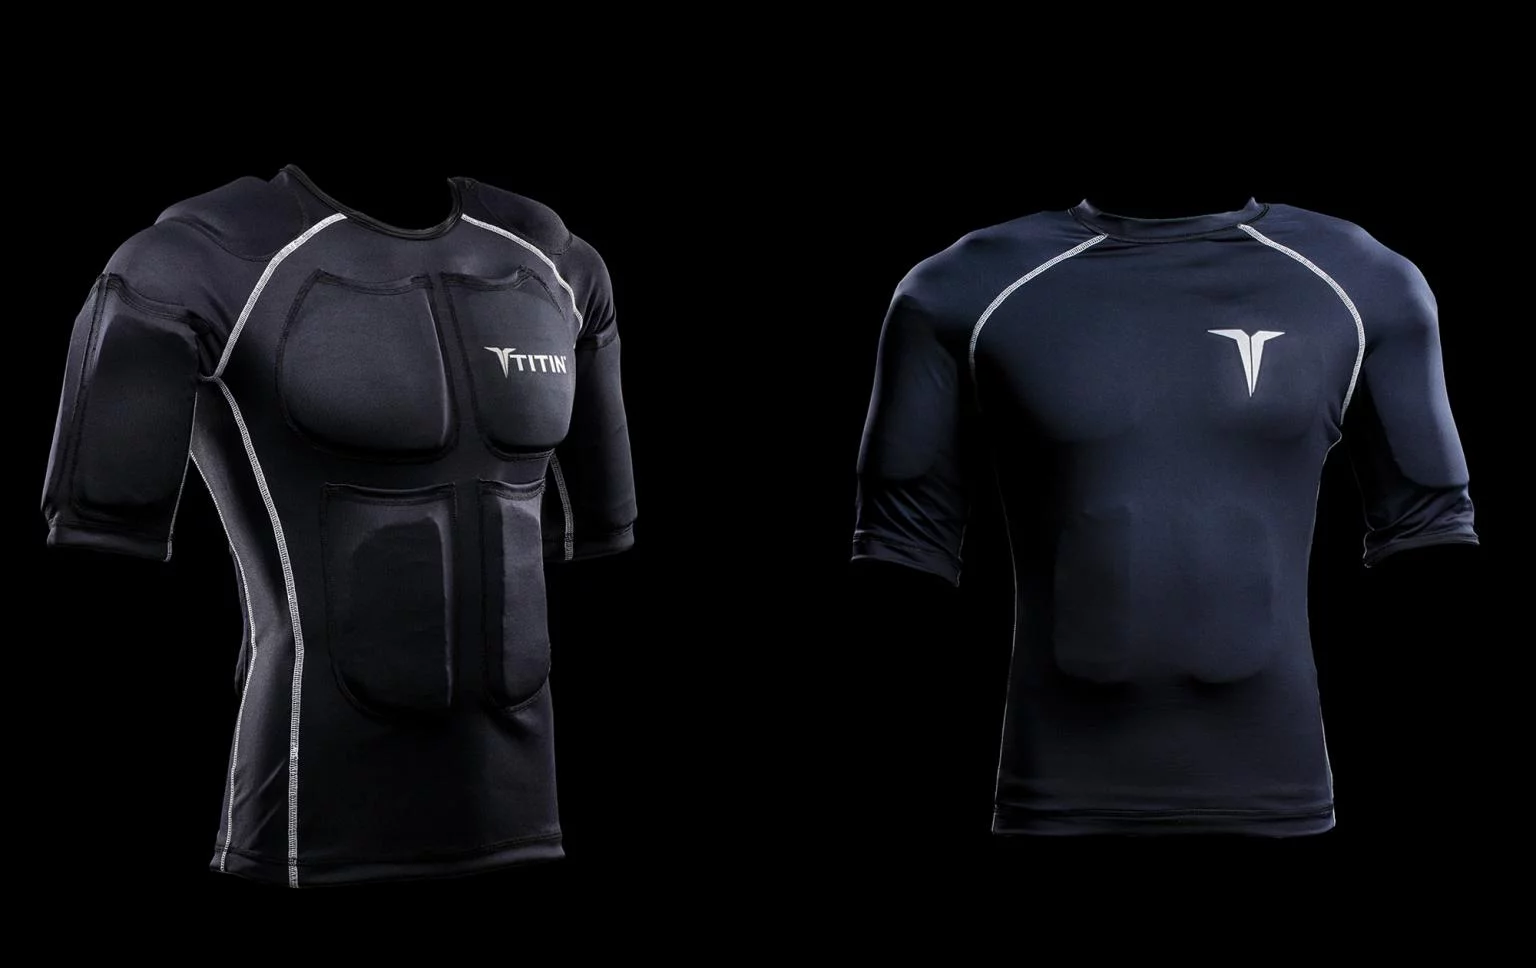 TITIN Weighted Shirts